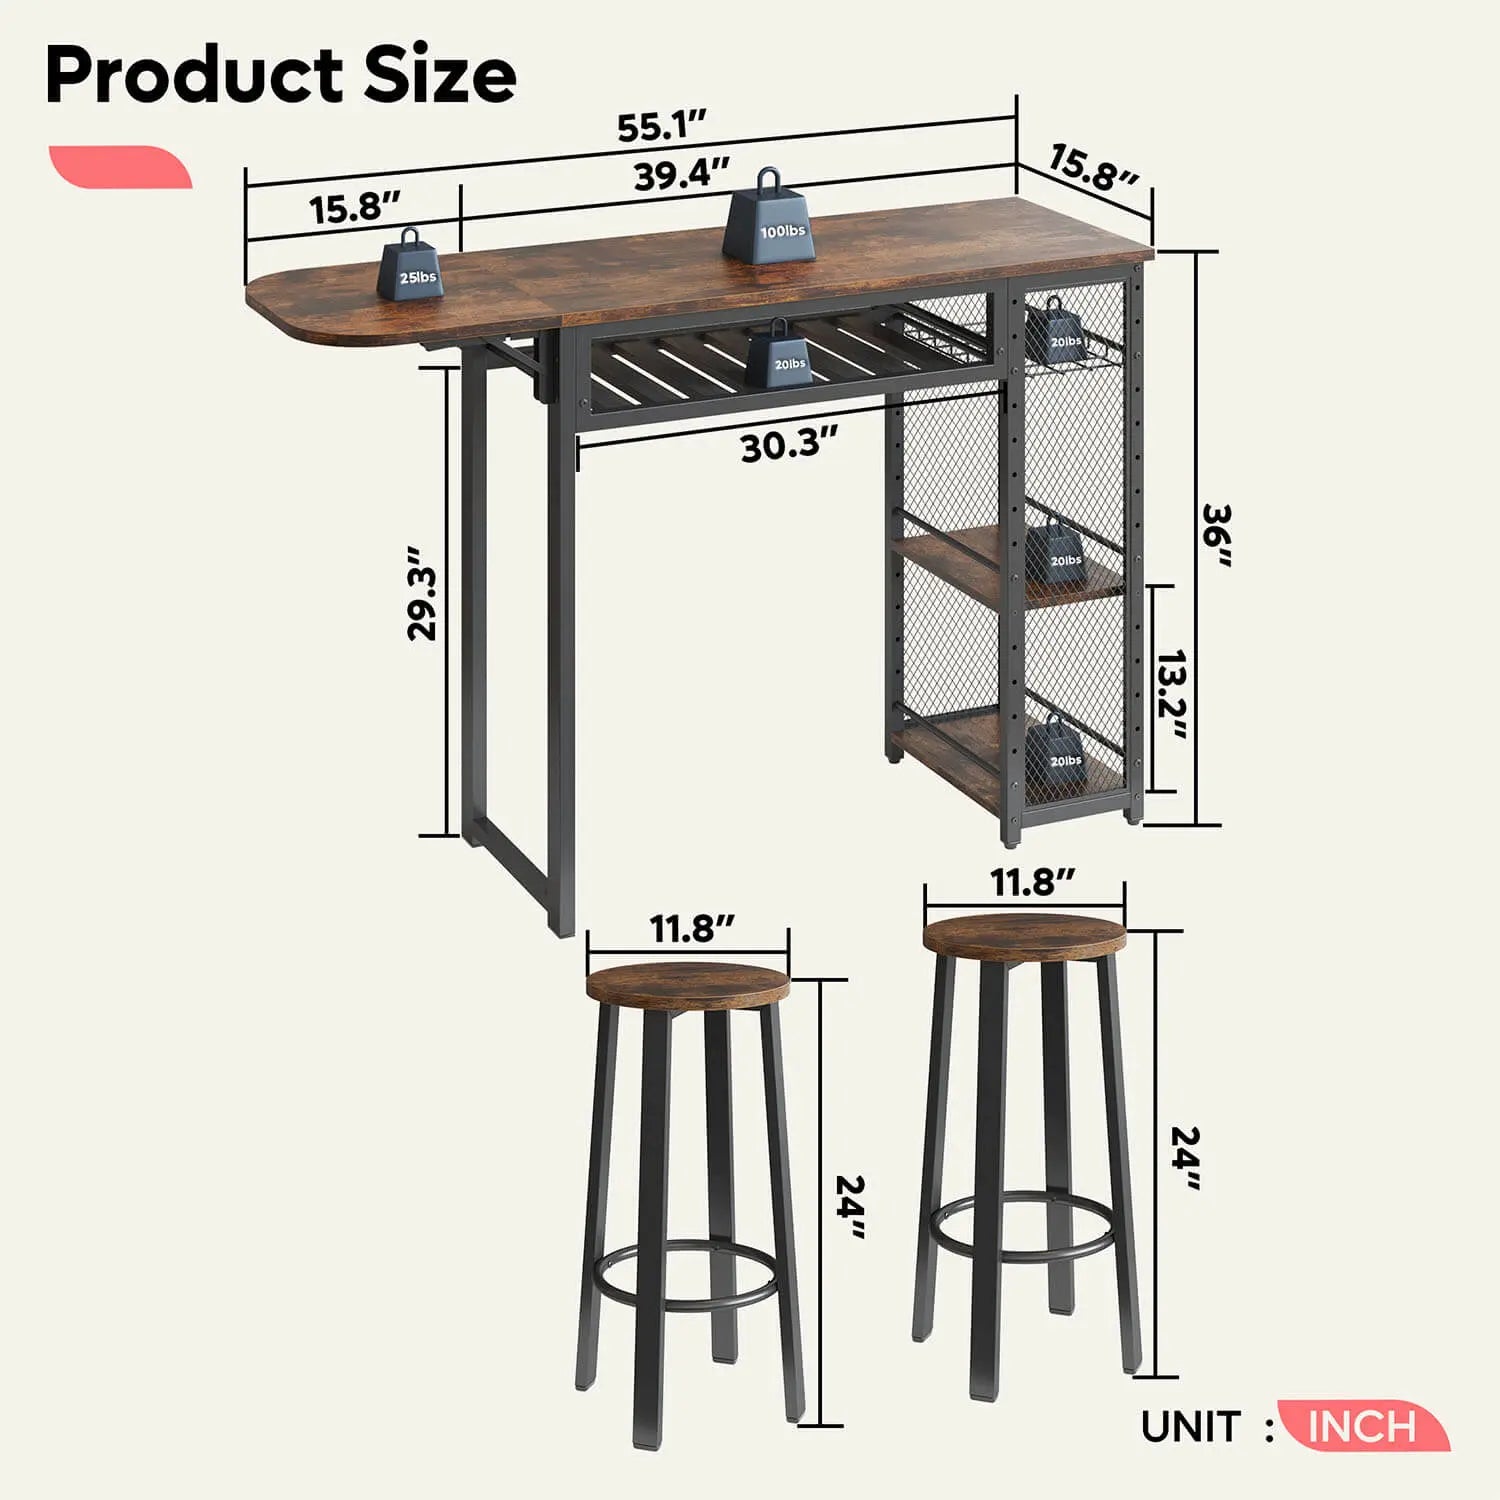 the size of Industrial Dining Set - Buffet Table and Chair Set - Bestier